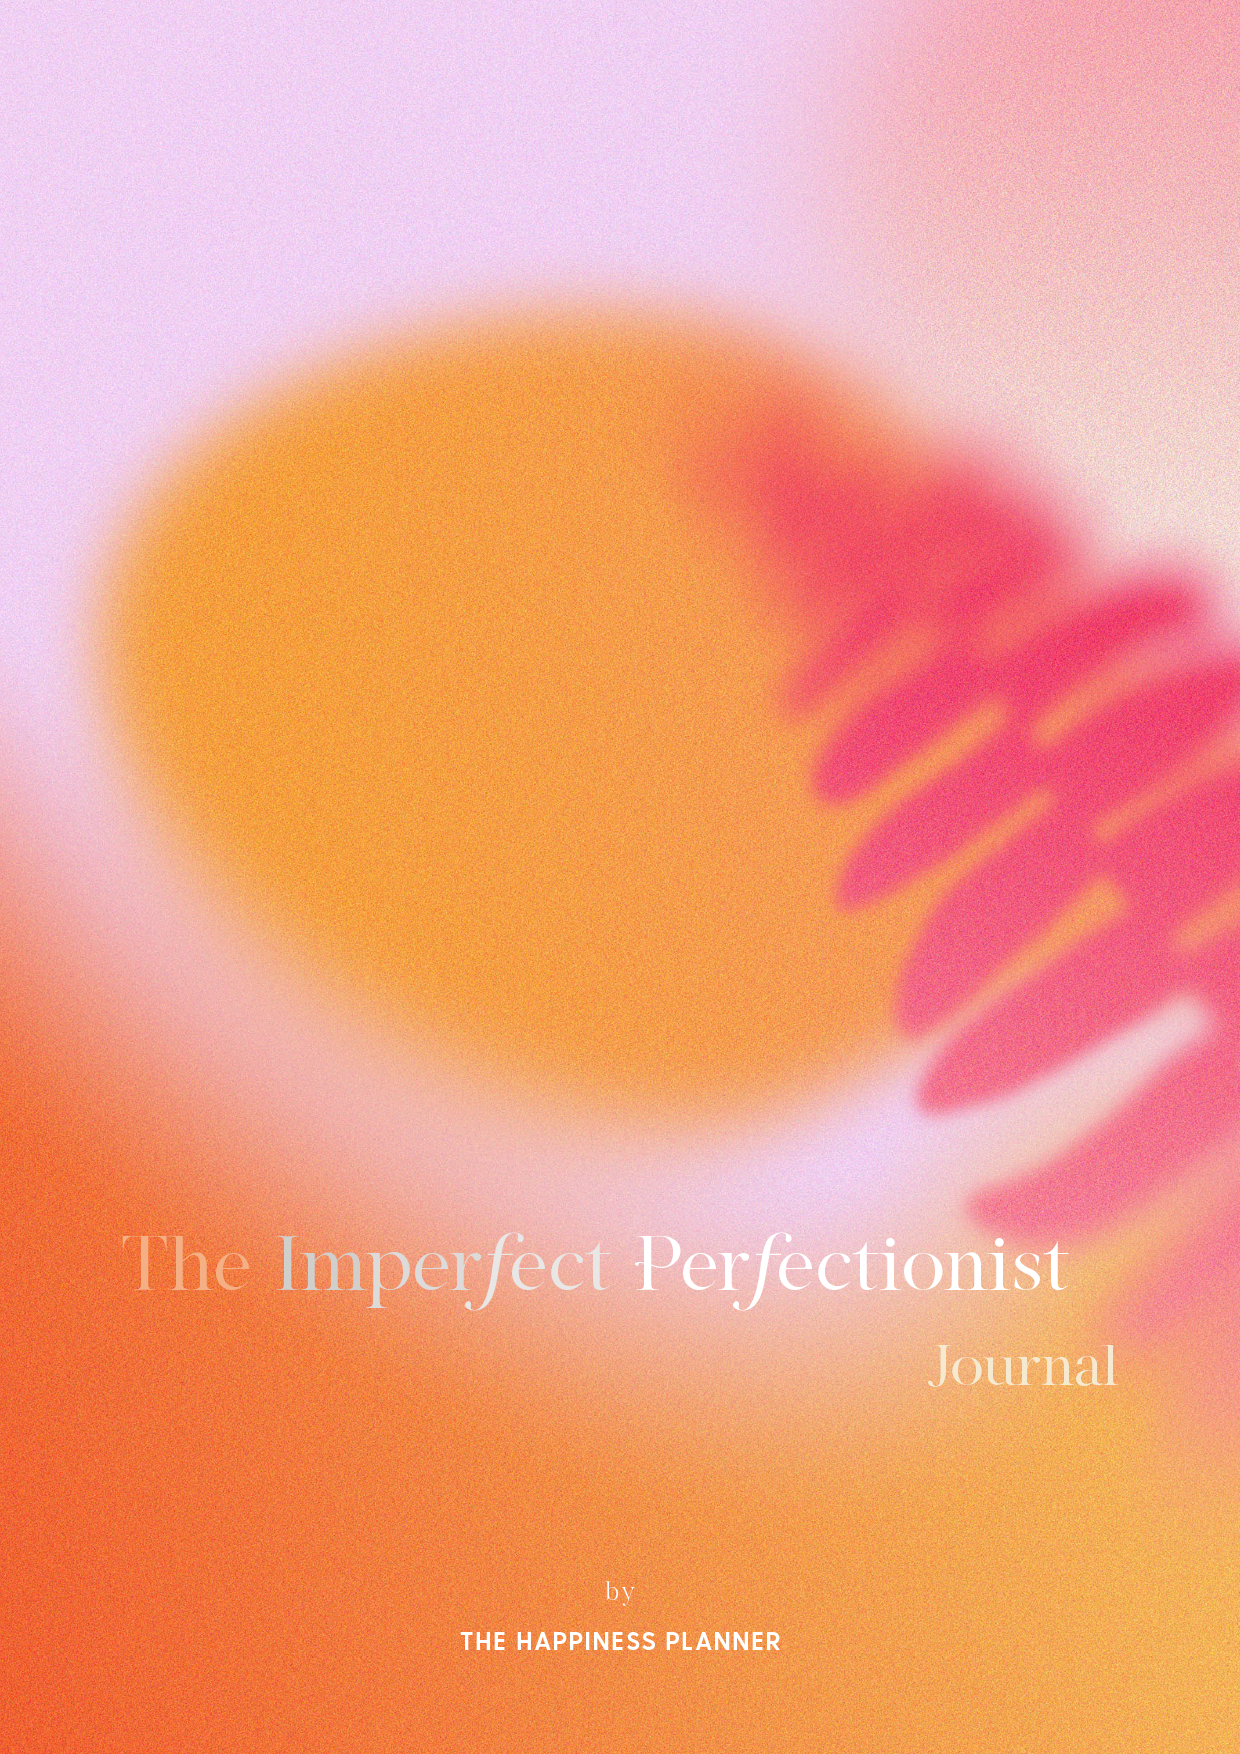 The Imperfect Perfectionist Journal